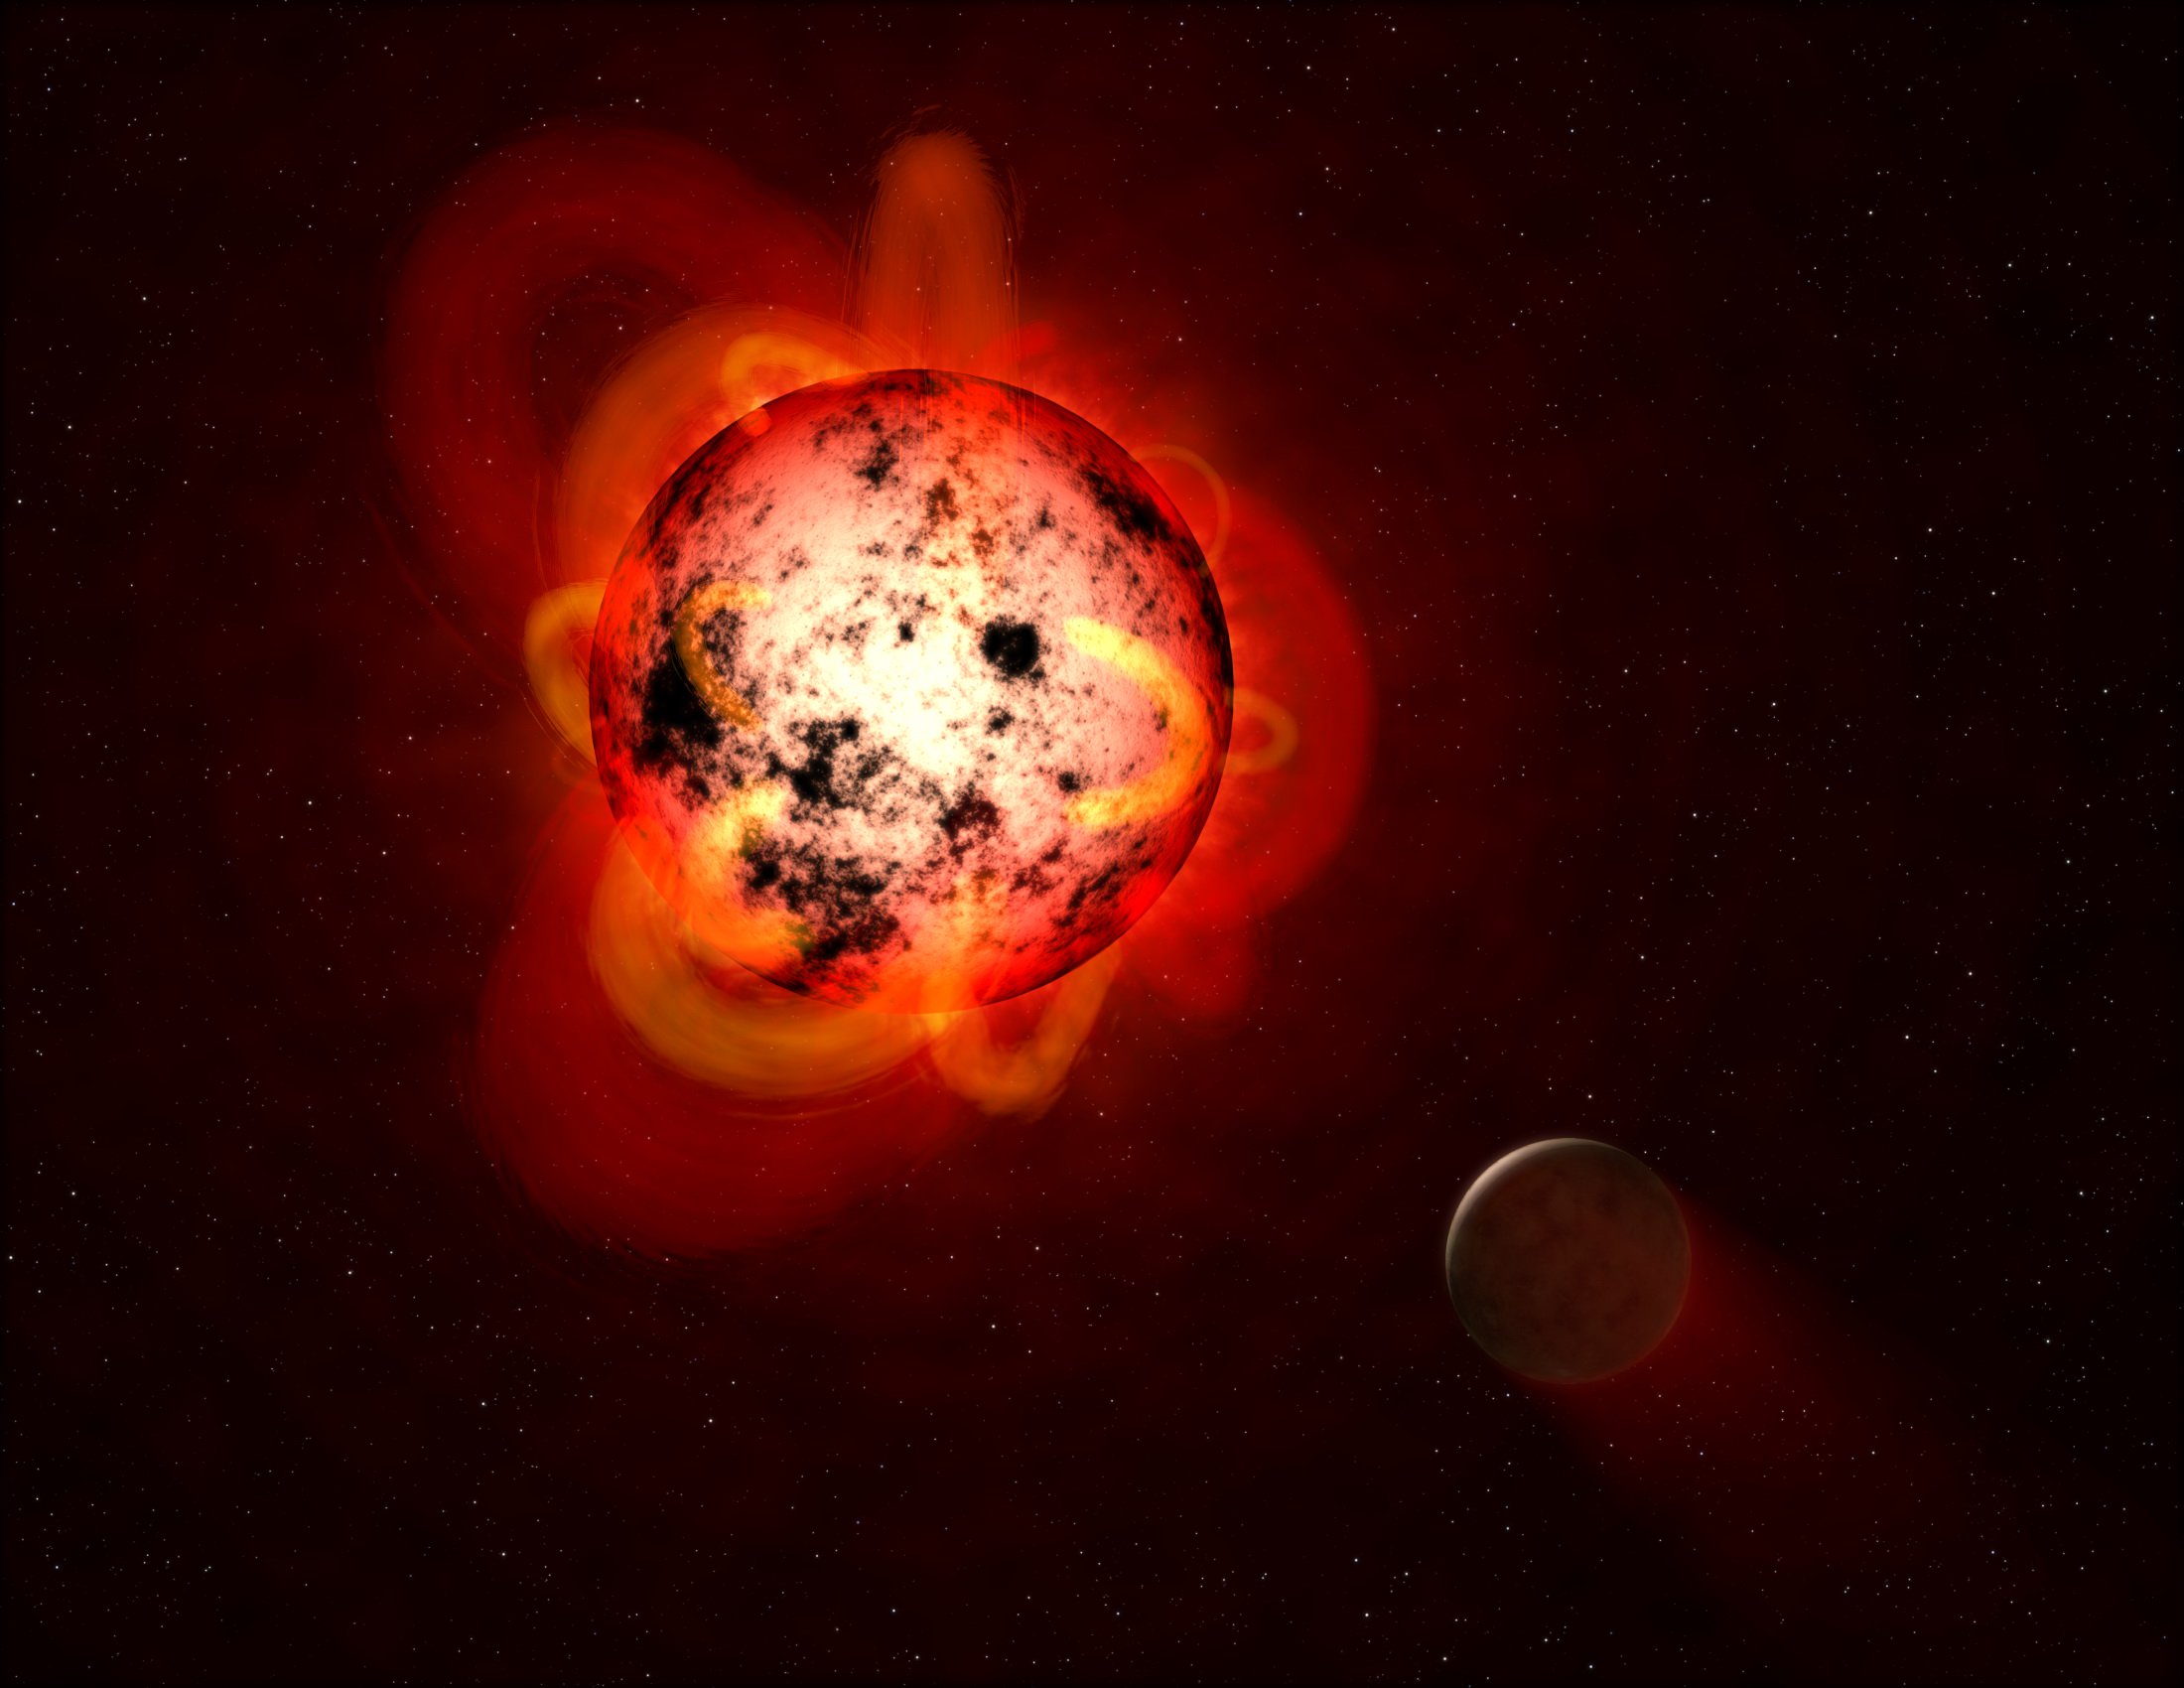 Another star system was sterilized from any possible life